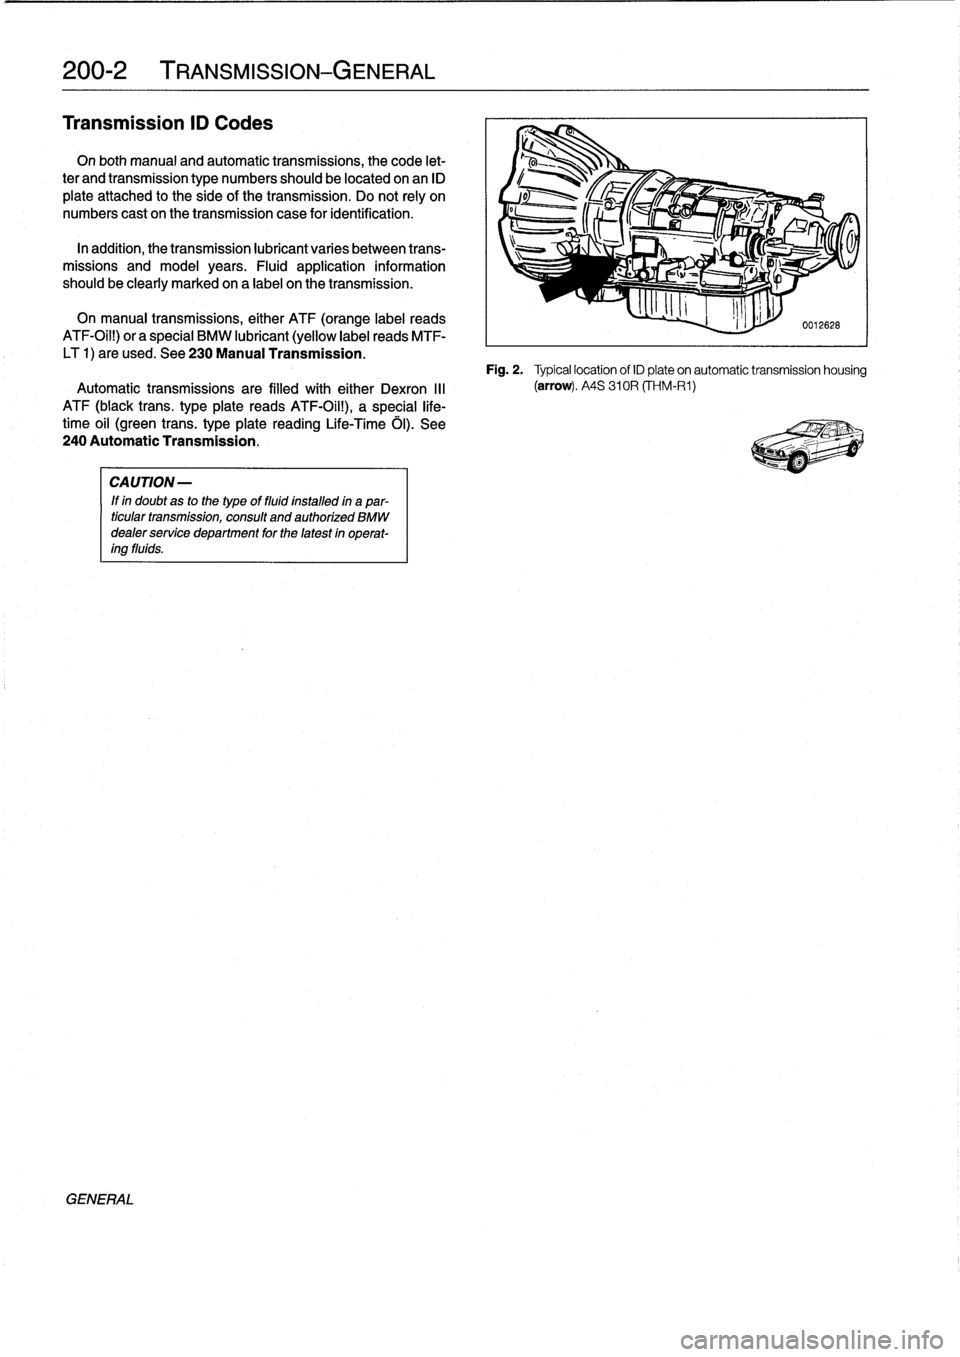 BMW 318i 1997 E36 Manual PDF 
200-2
TRANSMISSION-GENERAL

Transmission
ID
Codes

On
both
manual
and
automatic
transmissions,
the
code
let-

ter
and
transmission
type
numbers
should
be
located
onan
ID

plate
attached
to
the
síde
